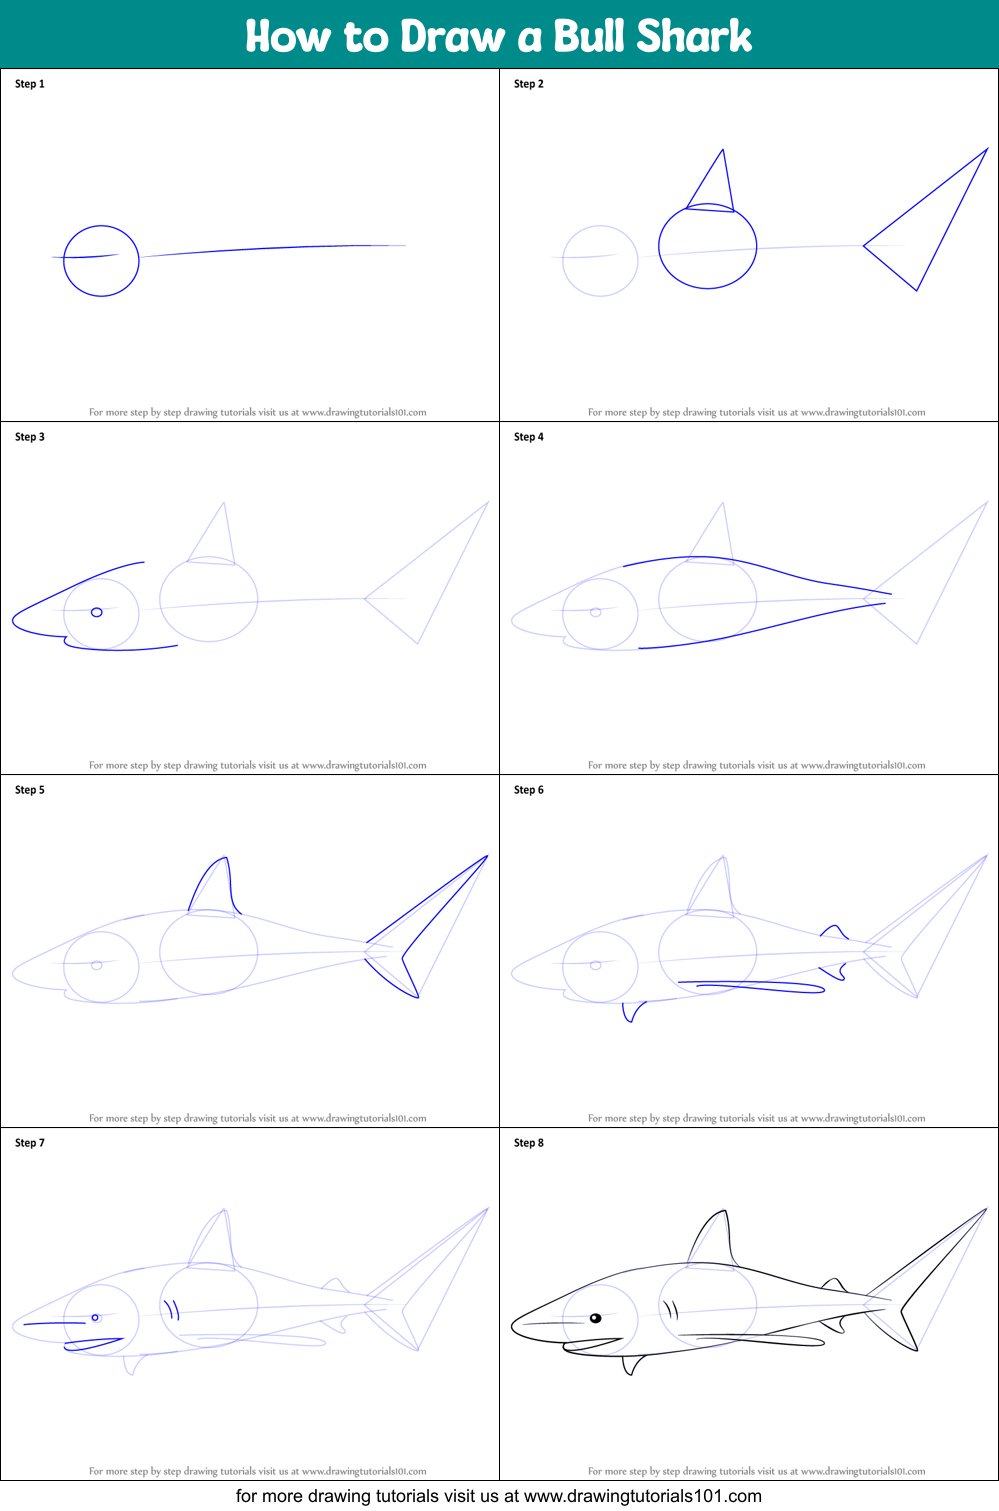 How to Draw a Bull Shark printable step by step drawing sheet